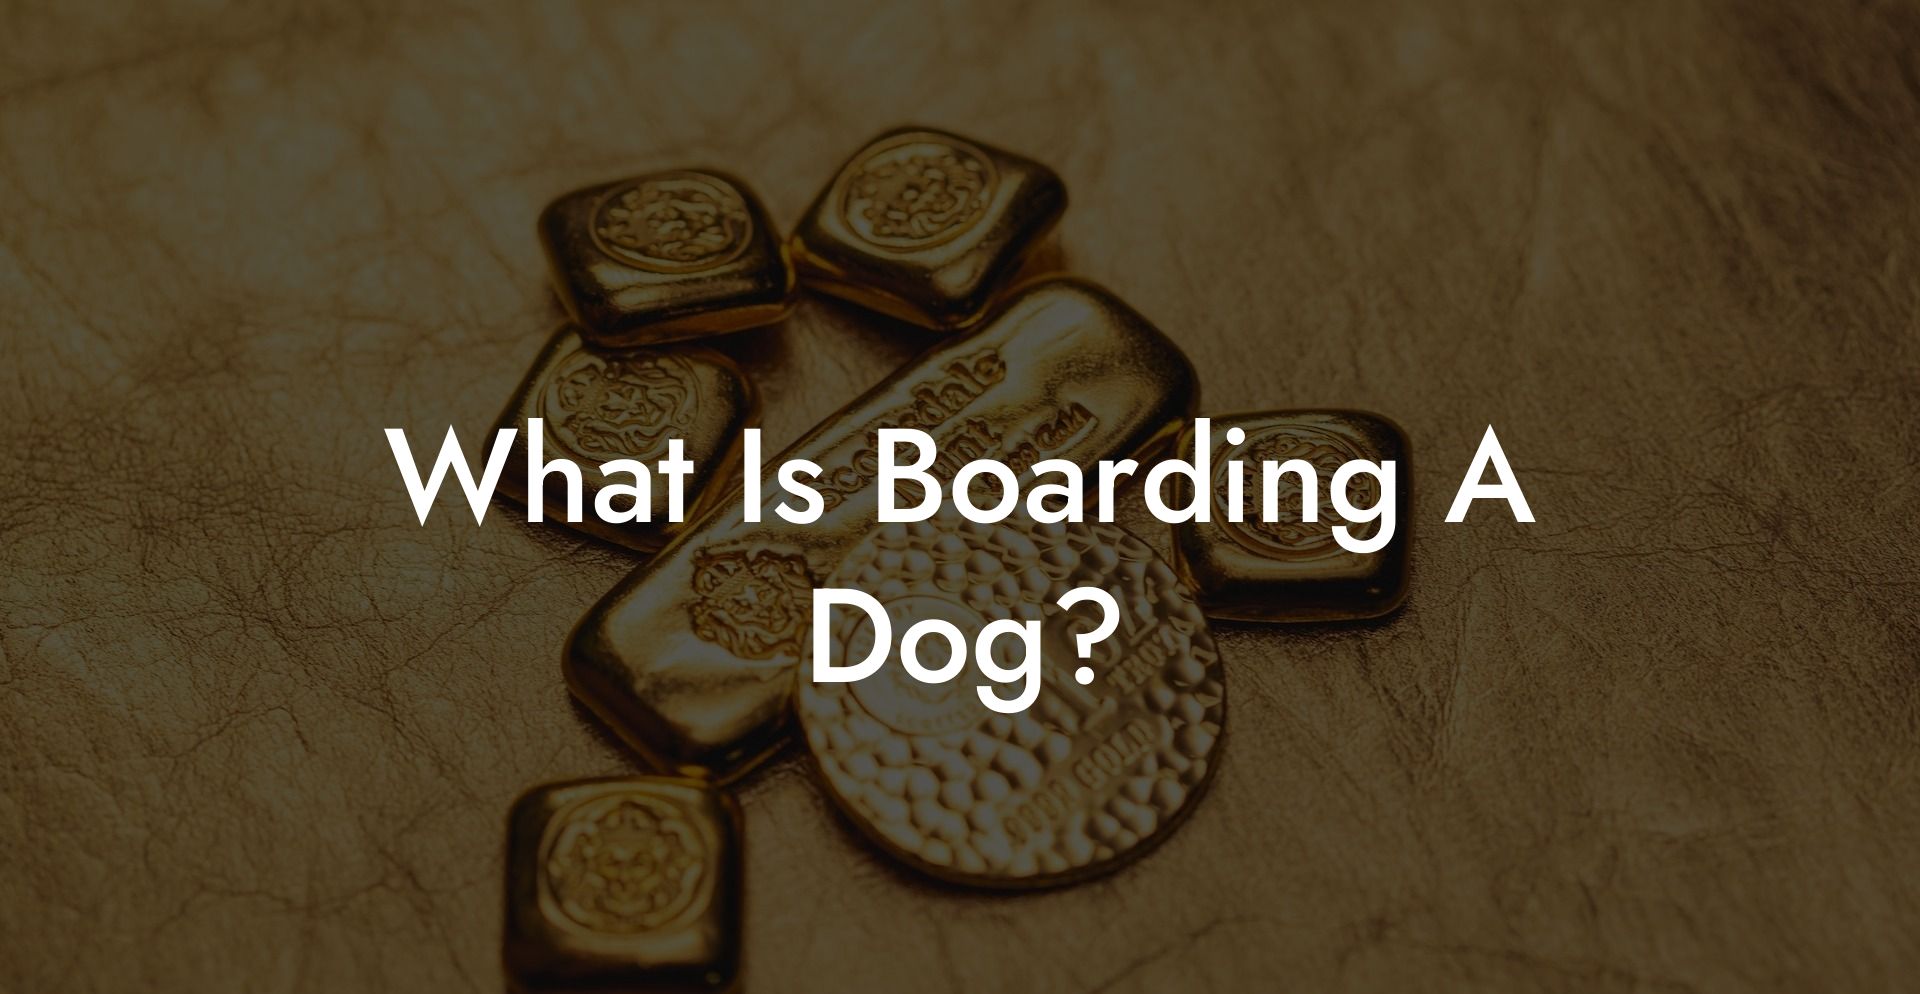 What Is Boarding A Dog?